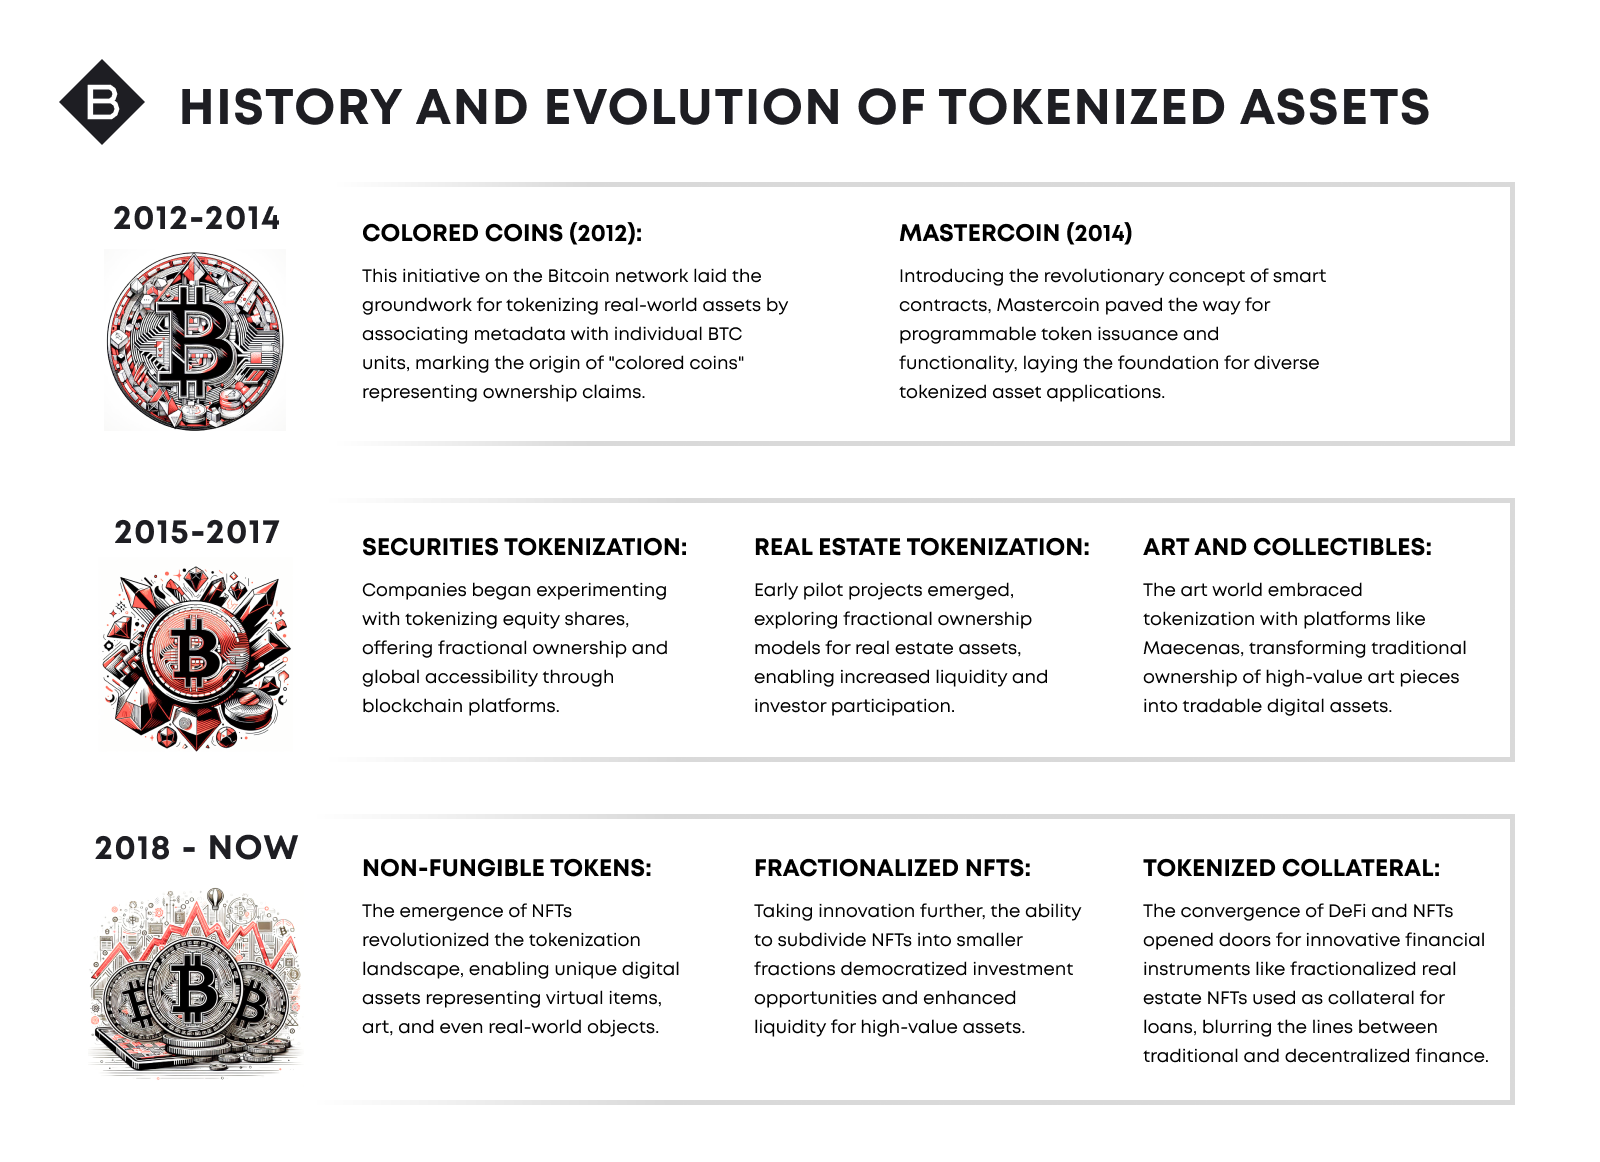 While the concept of asset tokenization can be traced back to the early days of Bitcoin, its practical implementation evolved alongside advancements in blockchain technology.